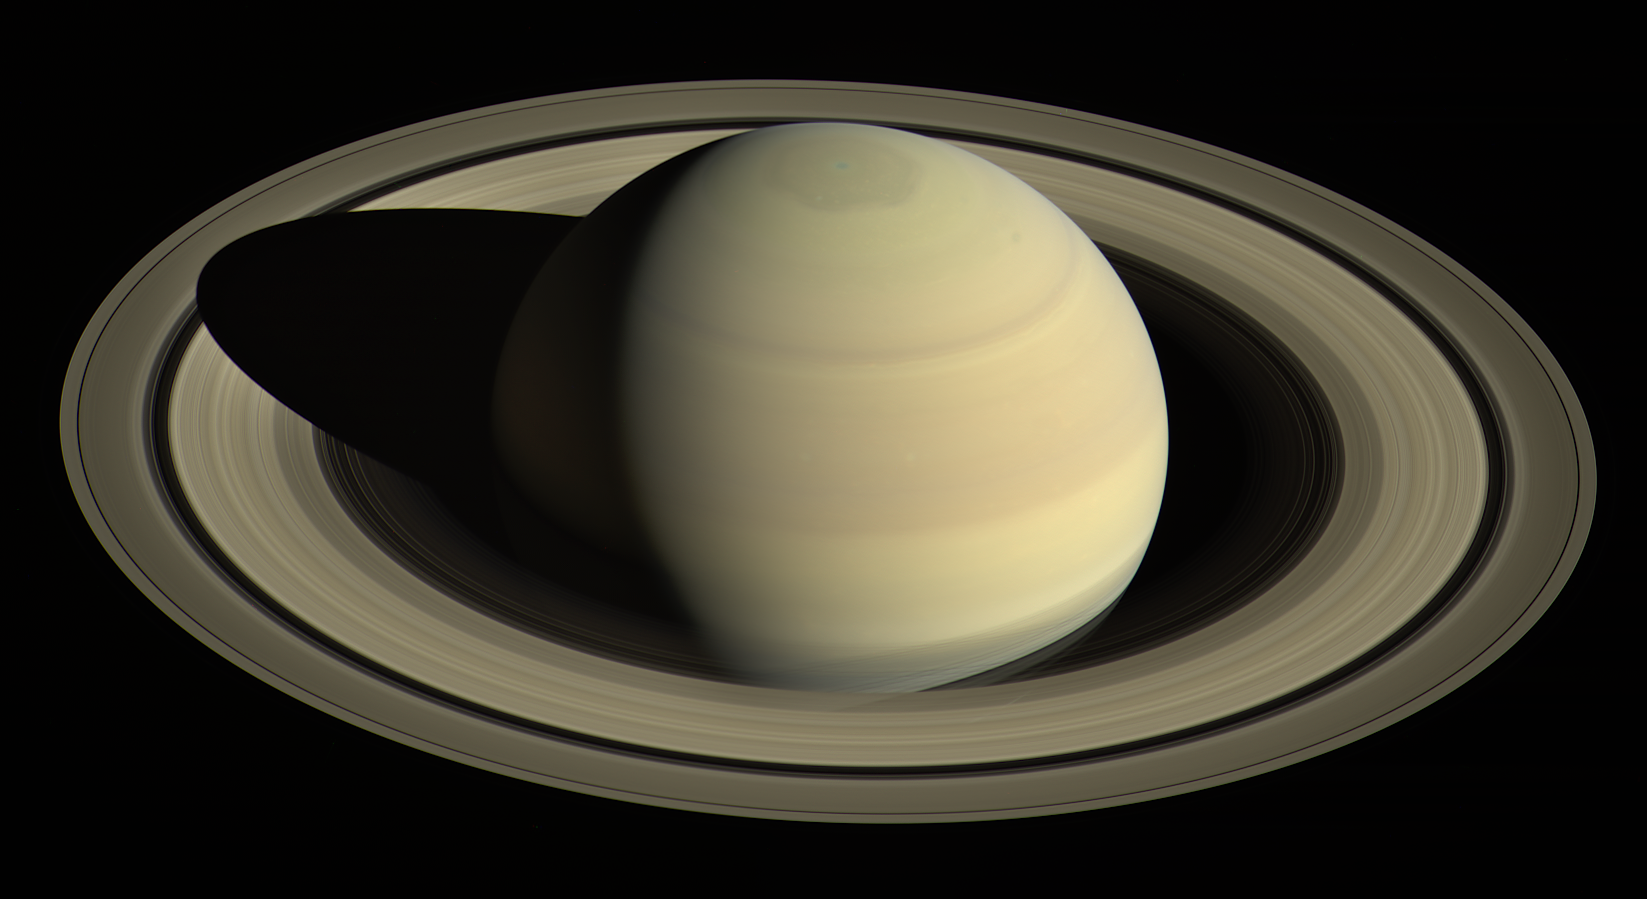 Saturn https://commons.wikimedia.org/wiki/File:Saturn_-_April_25_2016_(37612580000).png